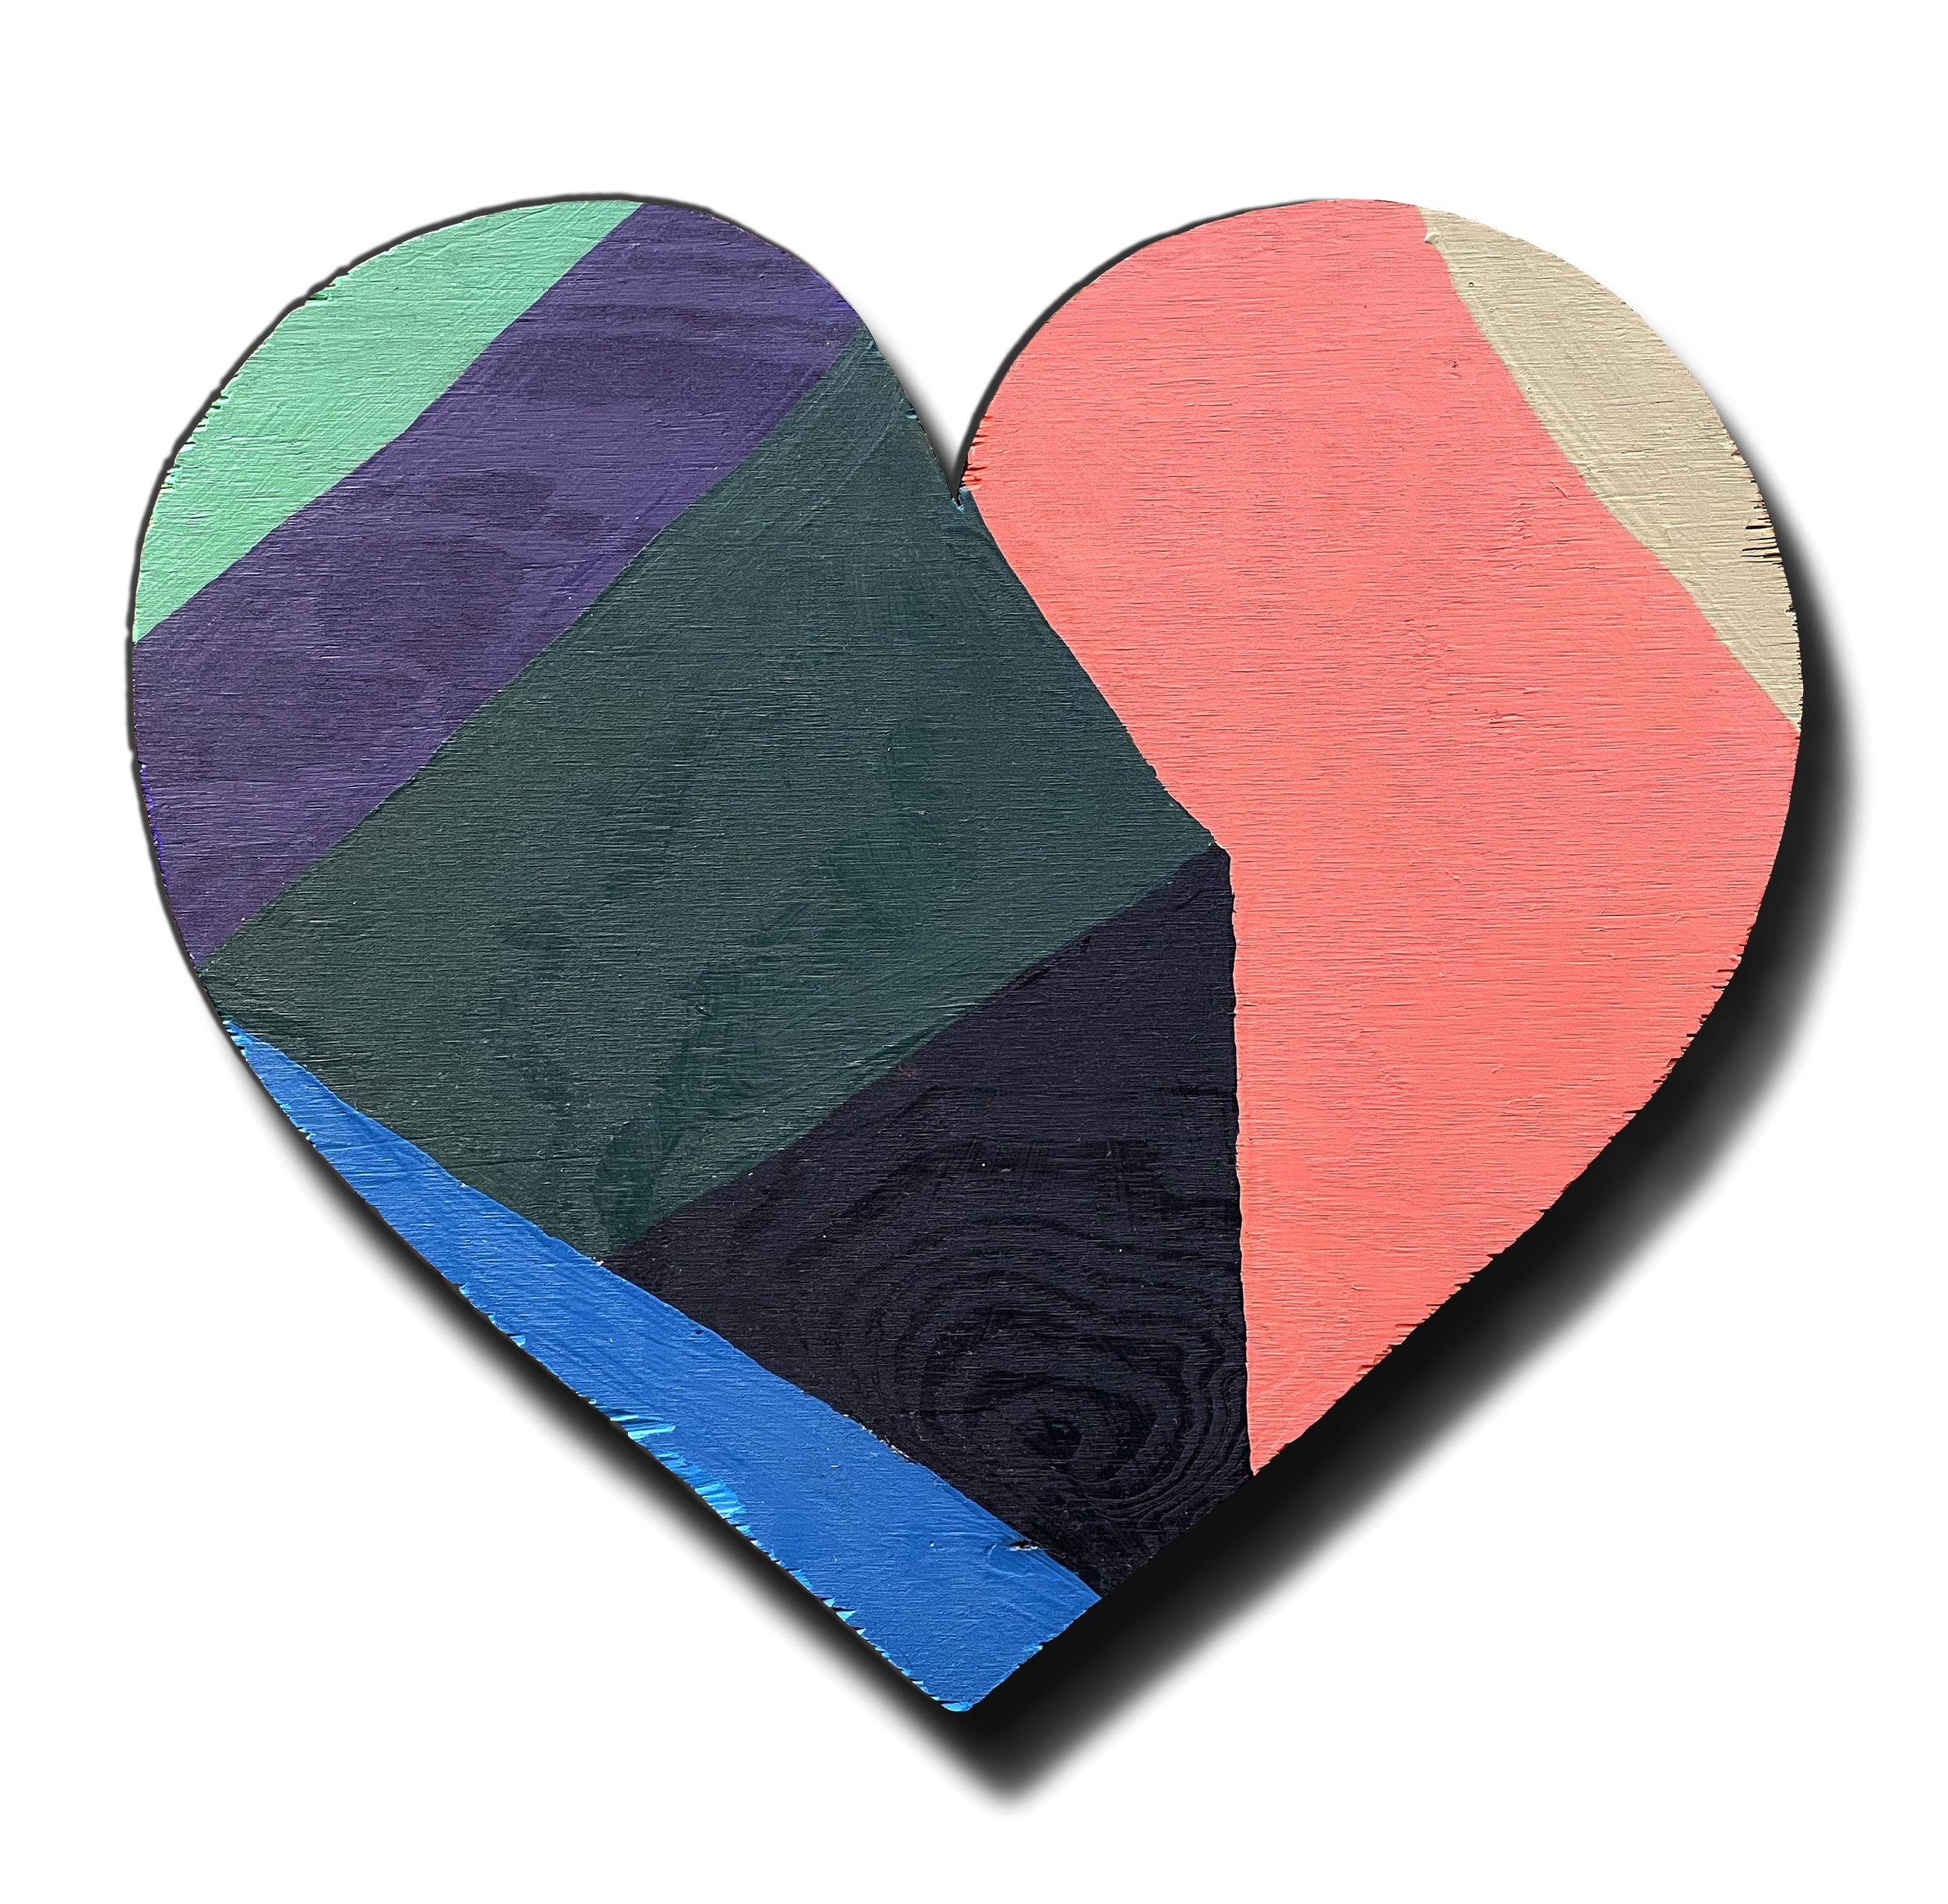   Heart  acrylic on wood. part of my Color Cut Outs series. 2016  exhibited -  Boynton Beach Arts and Cultural Center 2021; Art Attack, Fort Lauderdale 2019; General Provision during Color Cut Outs 2016  